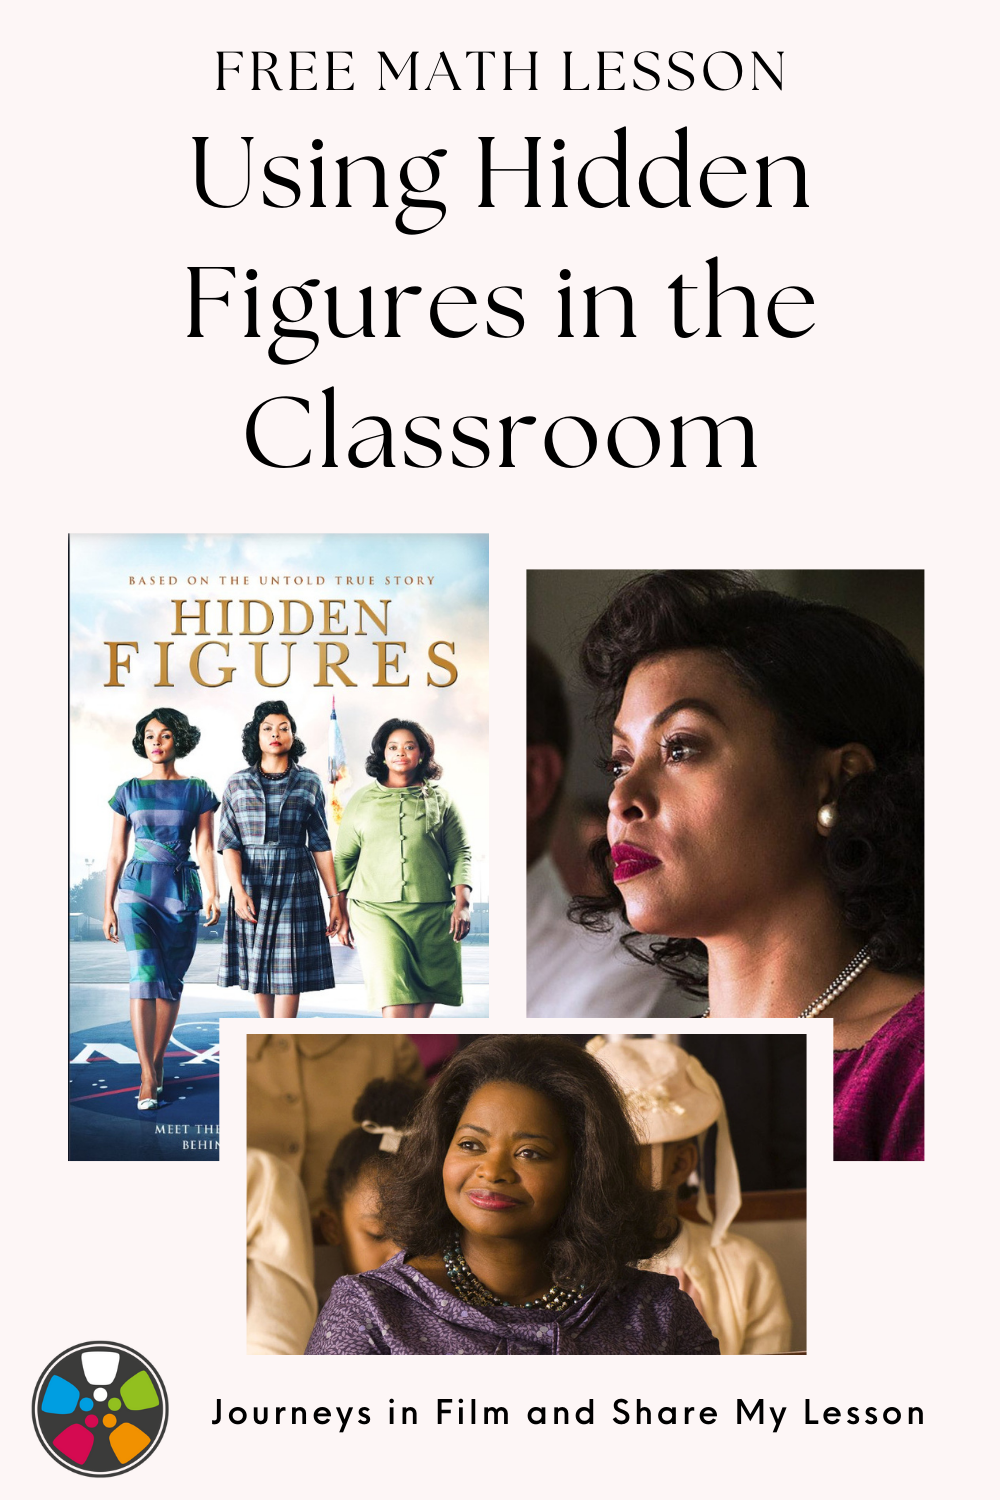 Pinterest image promoting Journeys in Film's Hidden Figures math resources. Featuring the Hidden Figures movie poster and images from the film of key Black women in the film. Text across the top reads: Free Math Lesson Using Hidden Figures in the Classroom